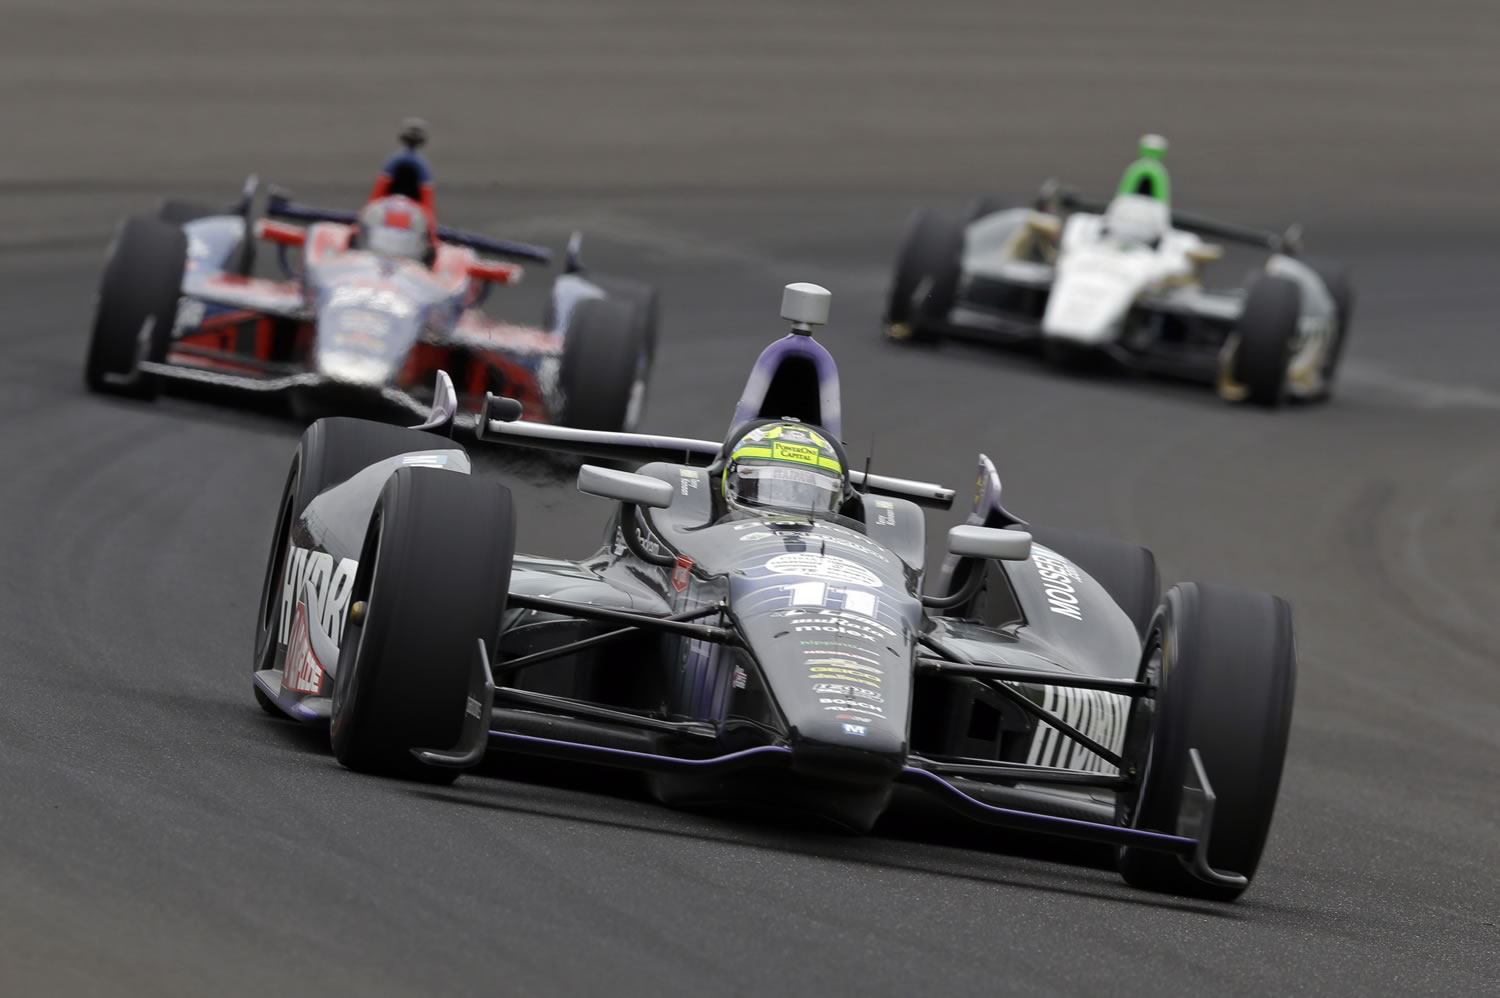 Tony Kanaan, of Brazil, drives through the first turn during the Indianapolis 500.